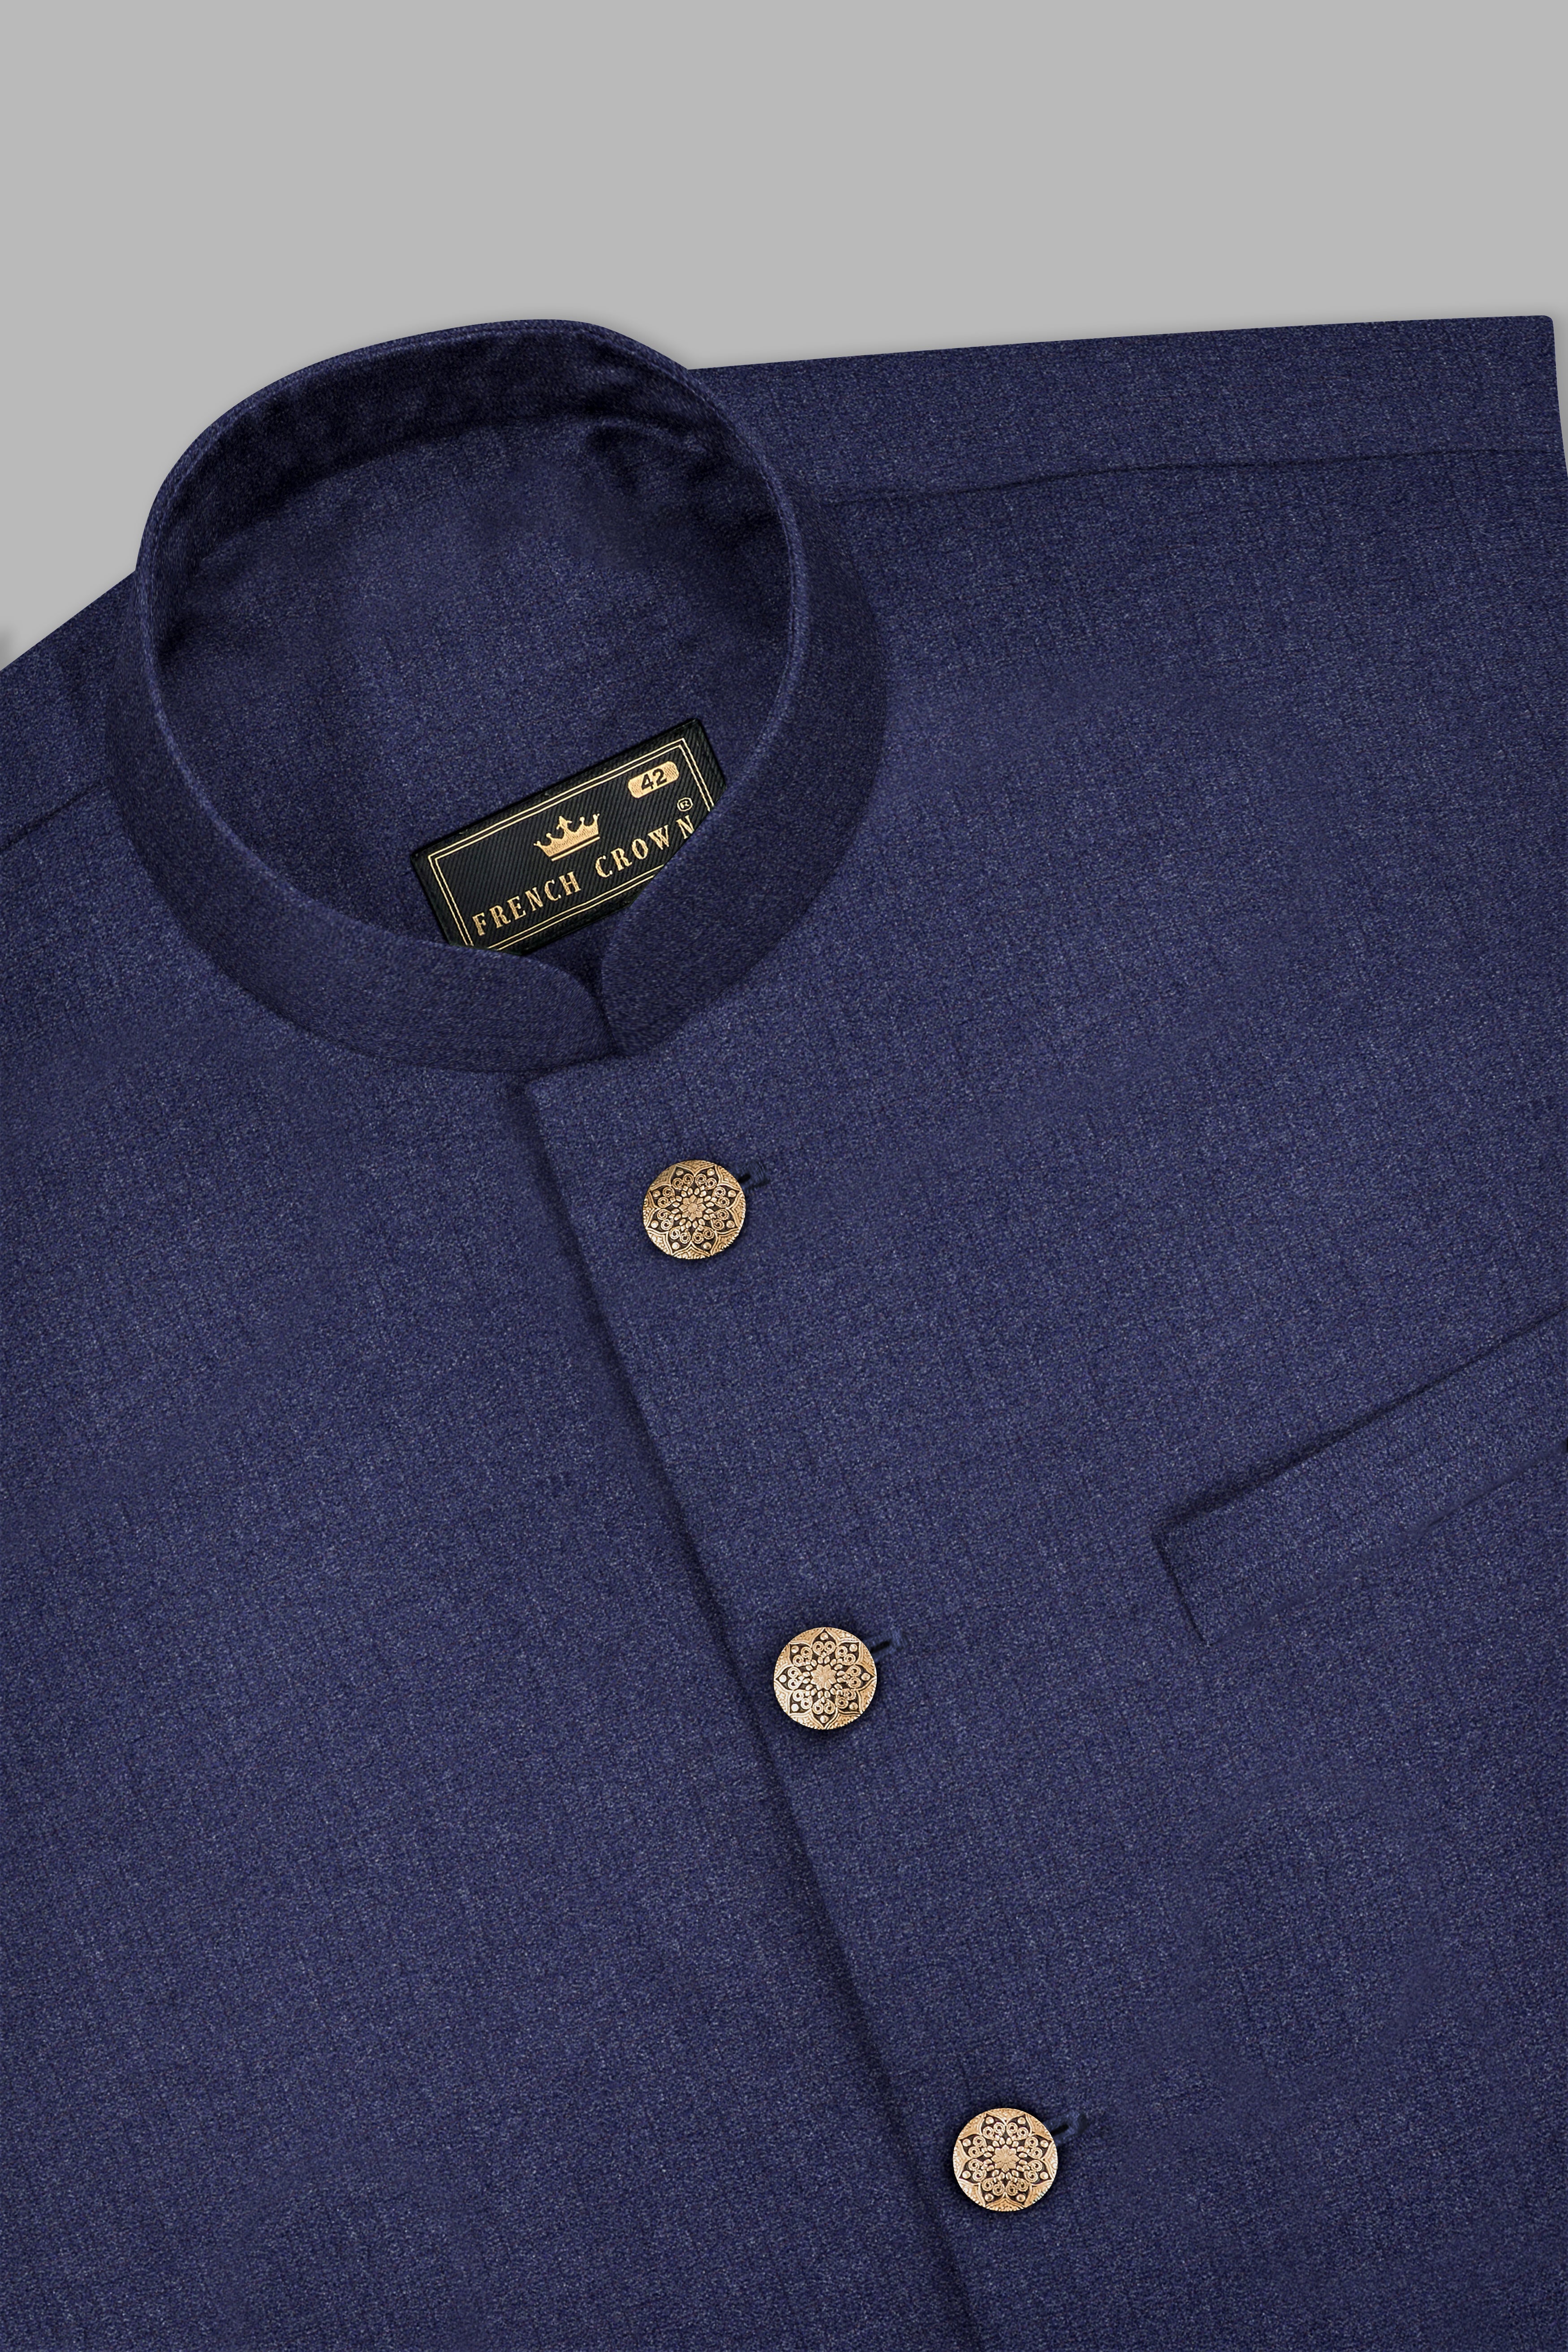 Ebony Clay Blue Textured Wool Blend Bandhgala Suit